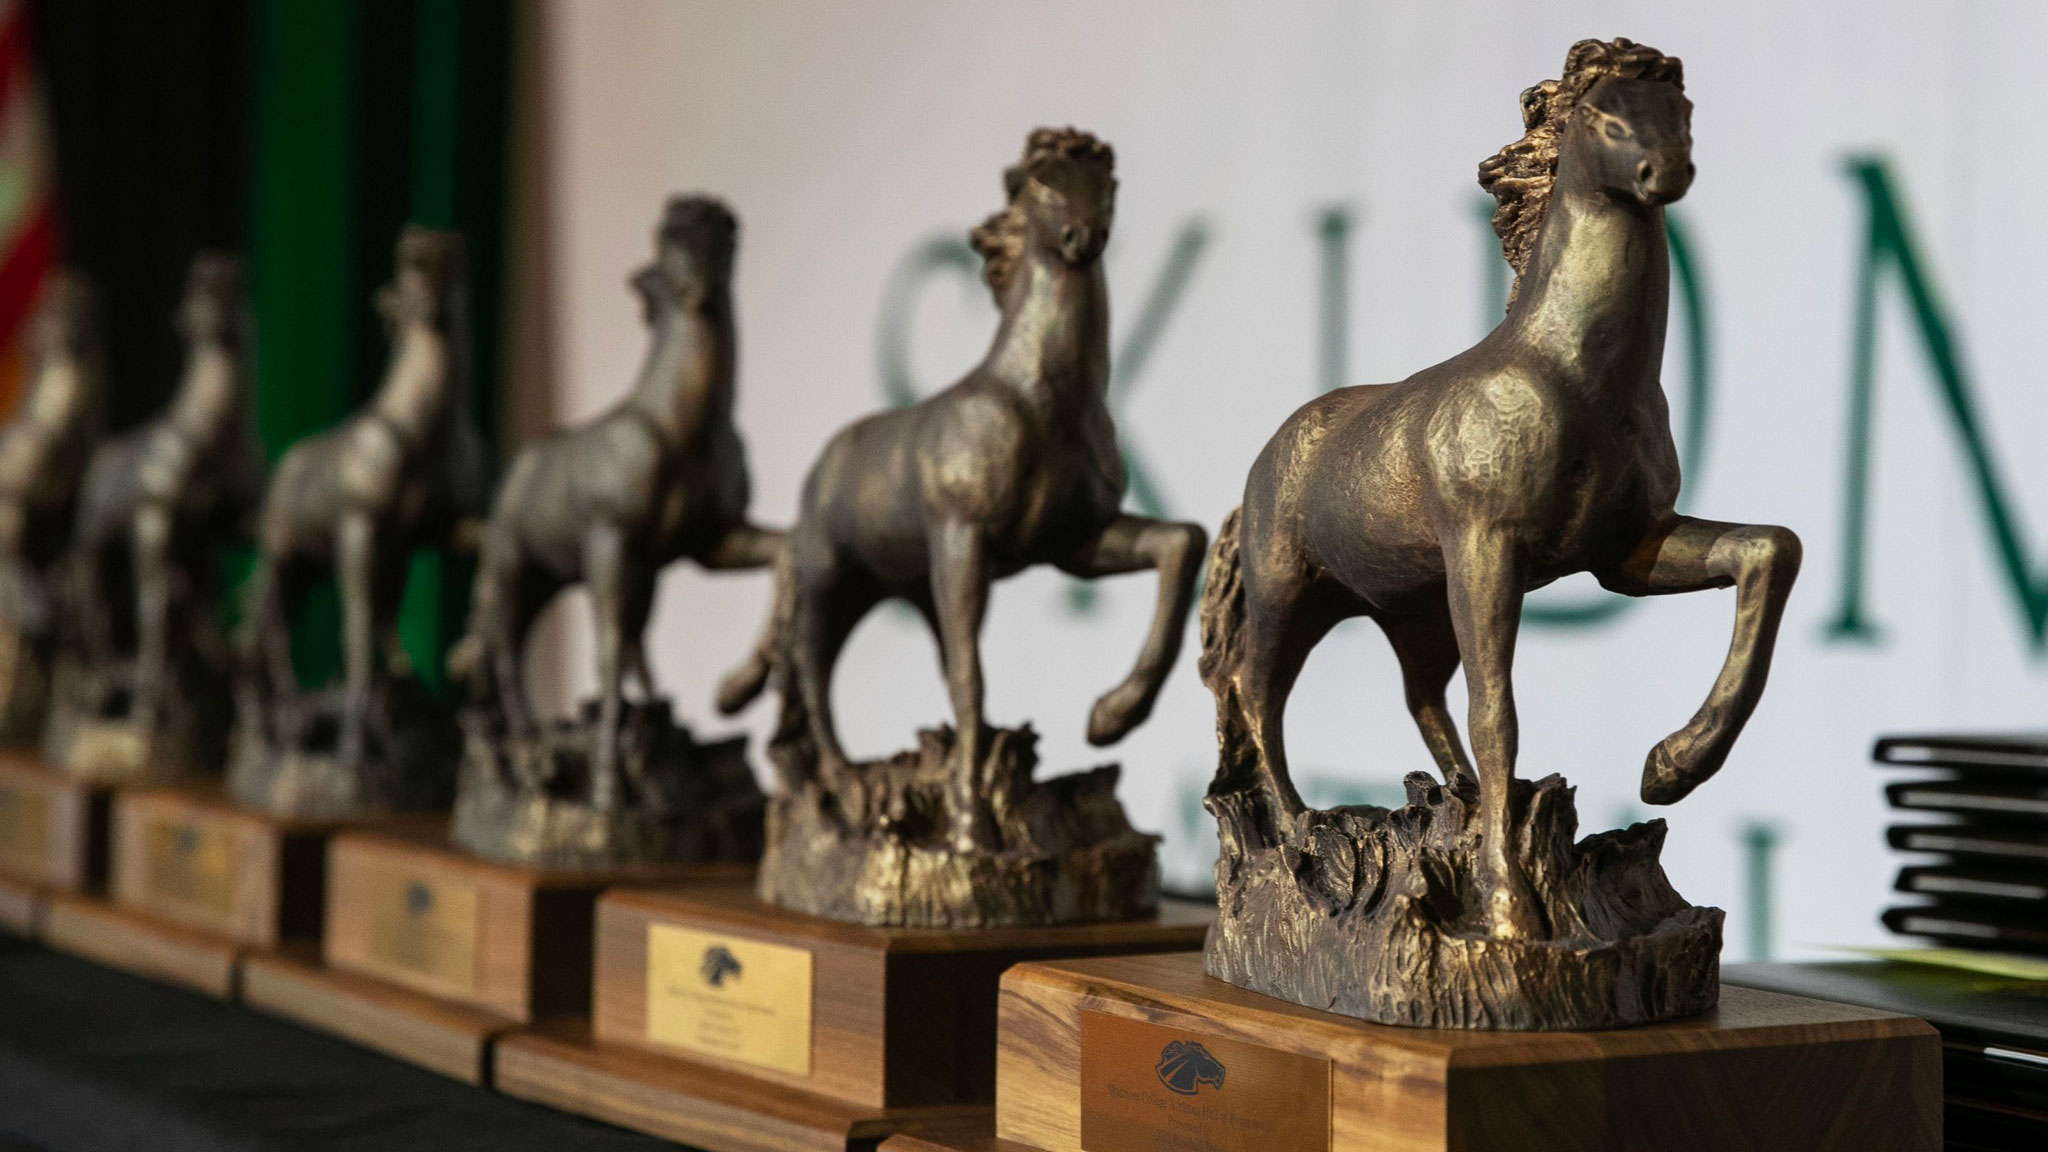 a line-up of trophies topped with a horse in motion on a stage awaiting distribution to hall of fame honorees